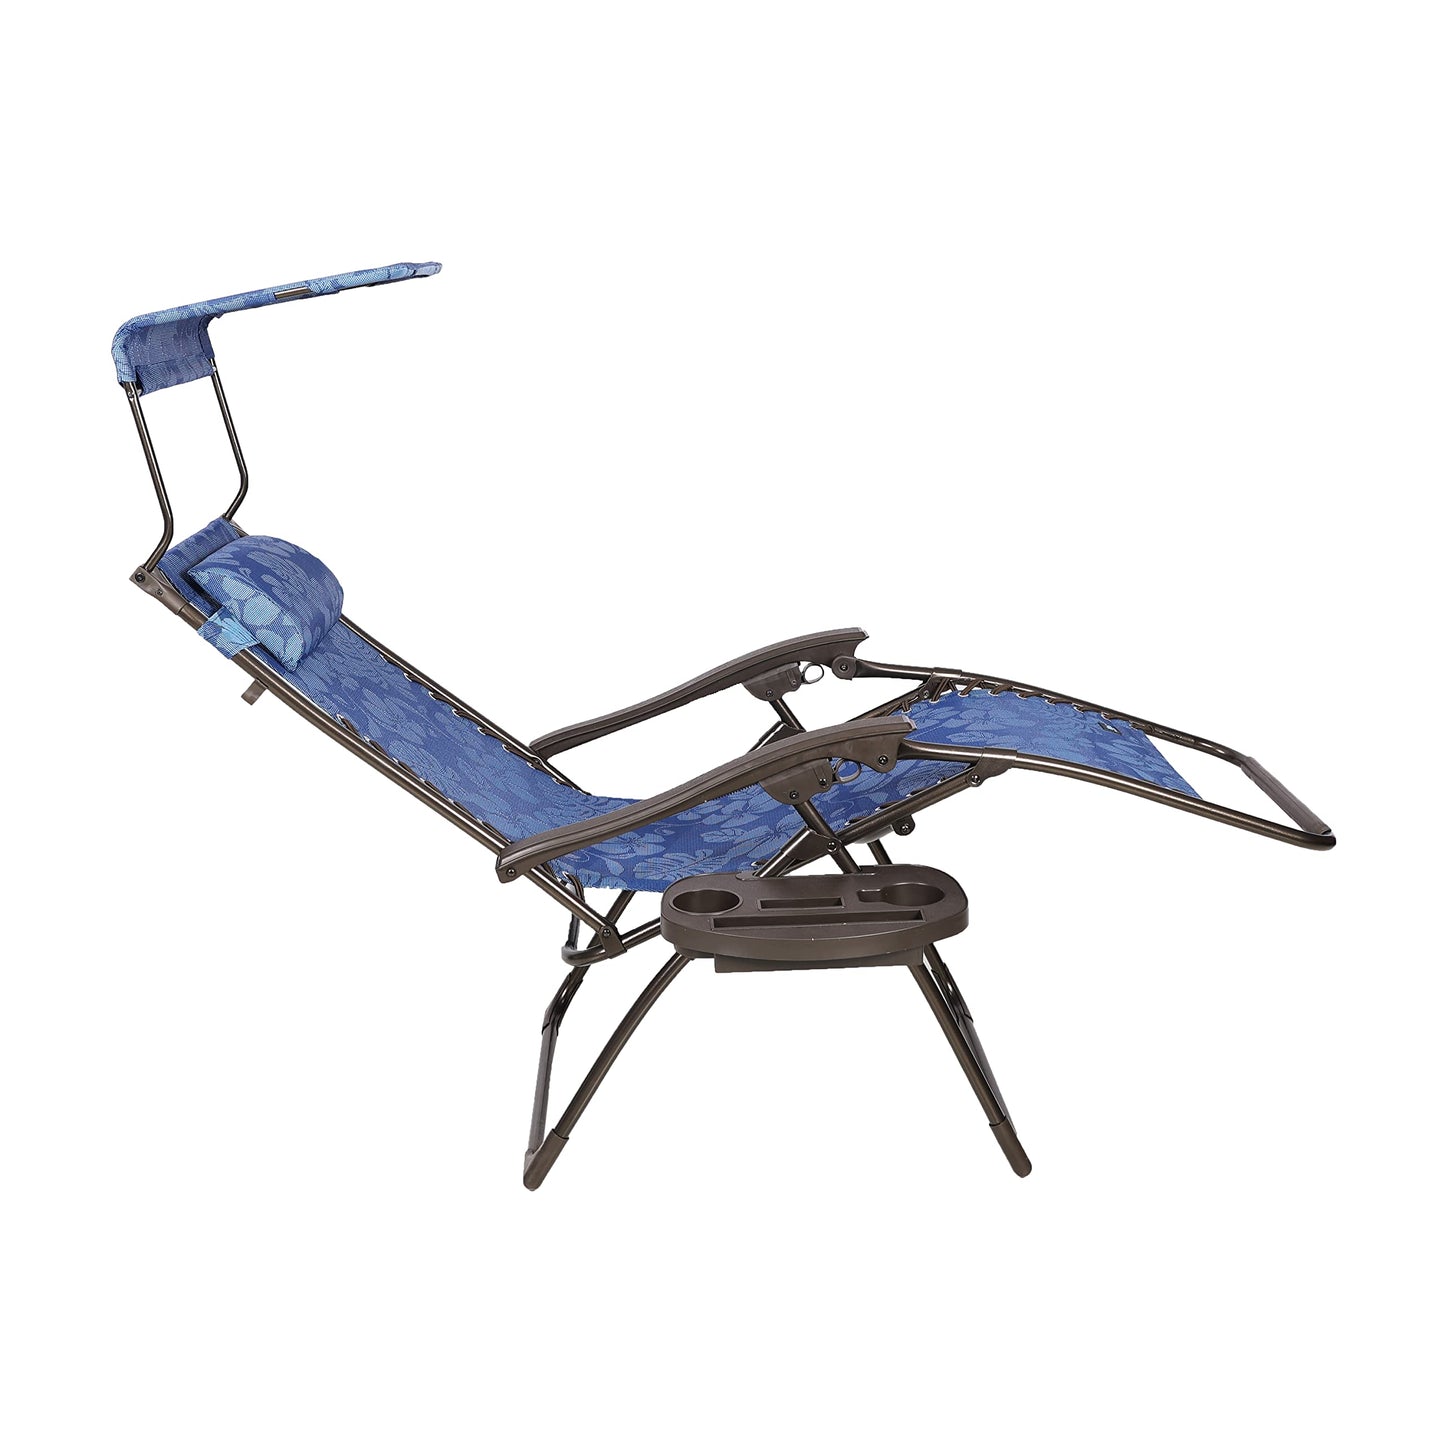 26" Wide Base Model Zero Gravity Chair w/ Canopy, Pillow, & Drink Tray Folding Outdoor Lawn, Deck, Patio Adjustable Lounge Chair, 300lbs. Weather and Rust Resistant, Blue Flower Single Pack 26-Inch